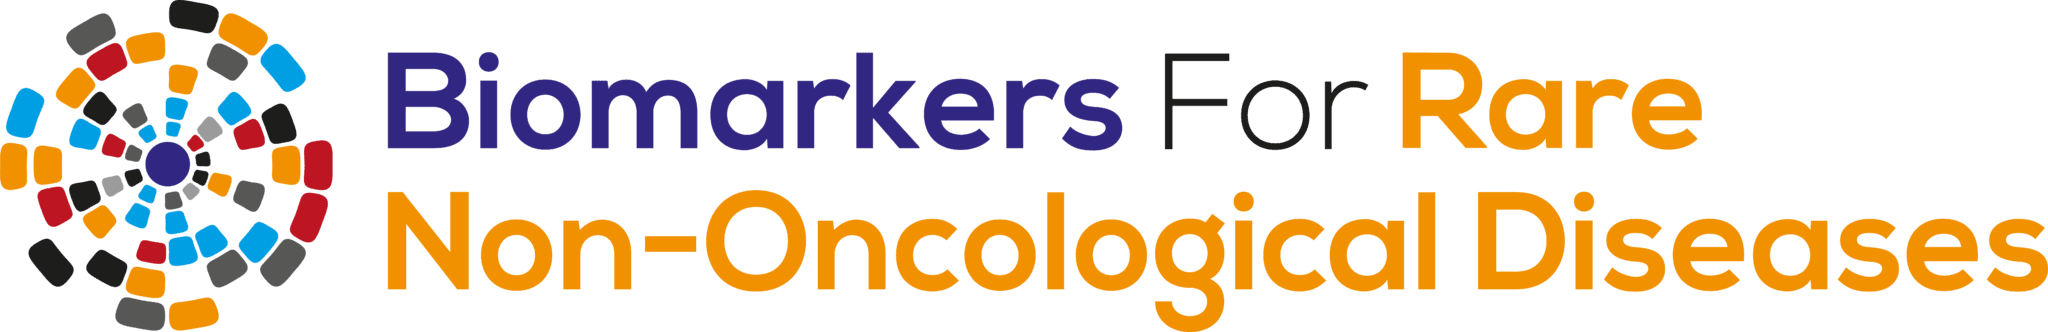 Biomarkers-for-Rare-Non-Oncological-Diseases-logo